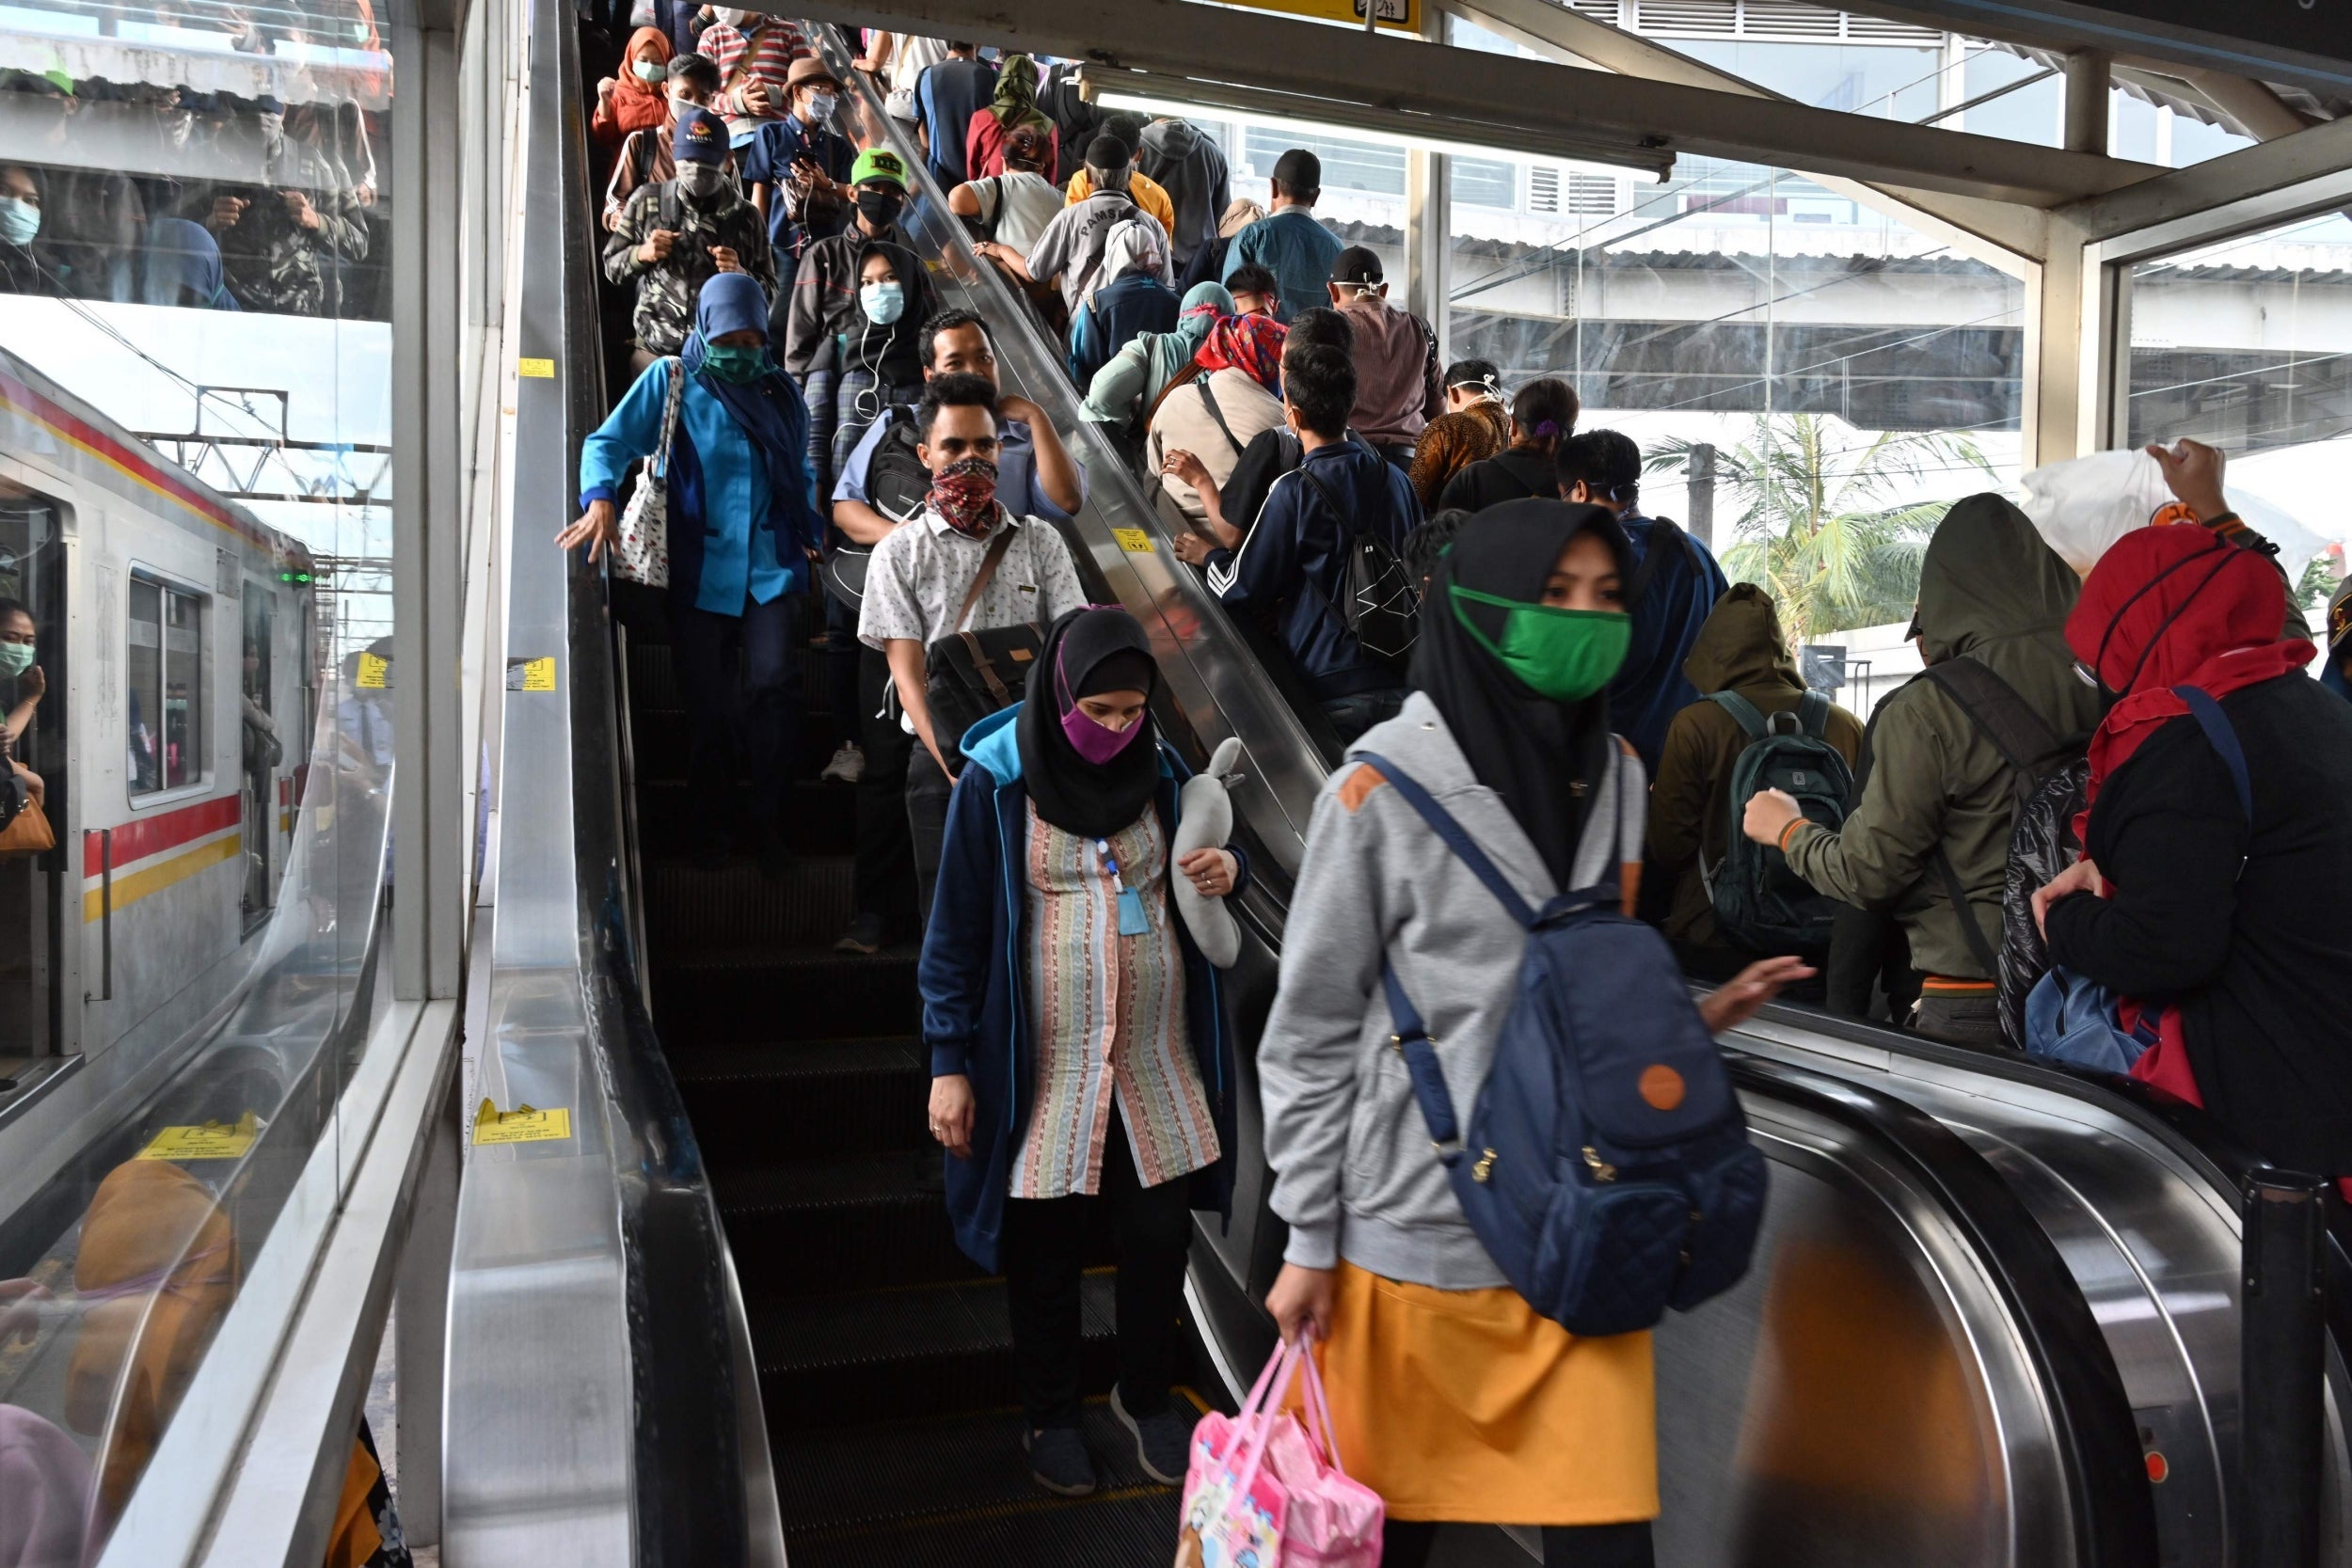 People wearing face masks, amid the coronavirus outbreak, commute at Tanah Abang train station, Jakarta on April 7, 2020 (Photo by ADEK BERRY/AFP via Getty Images)